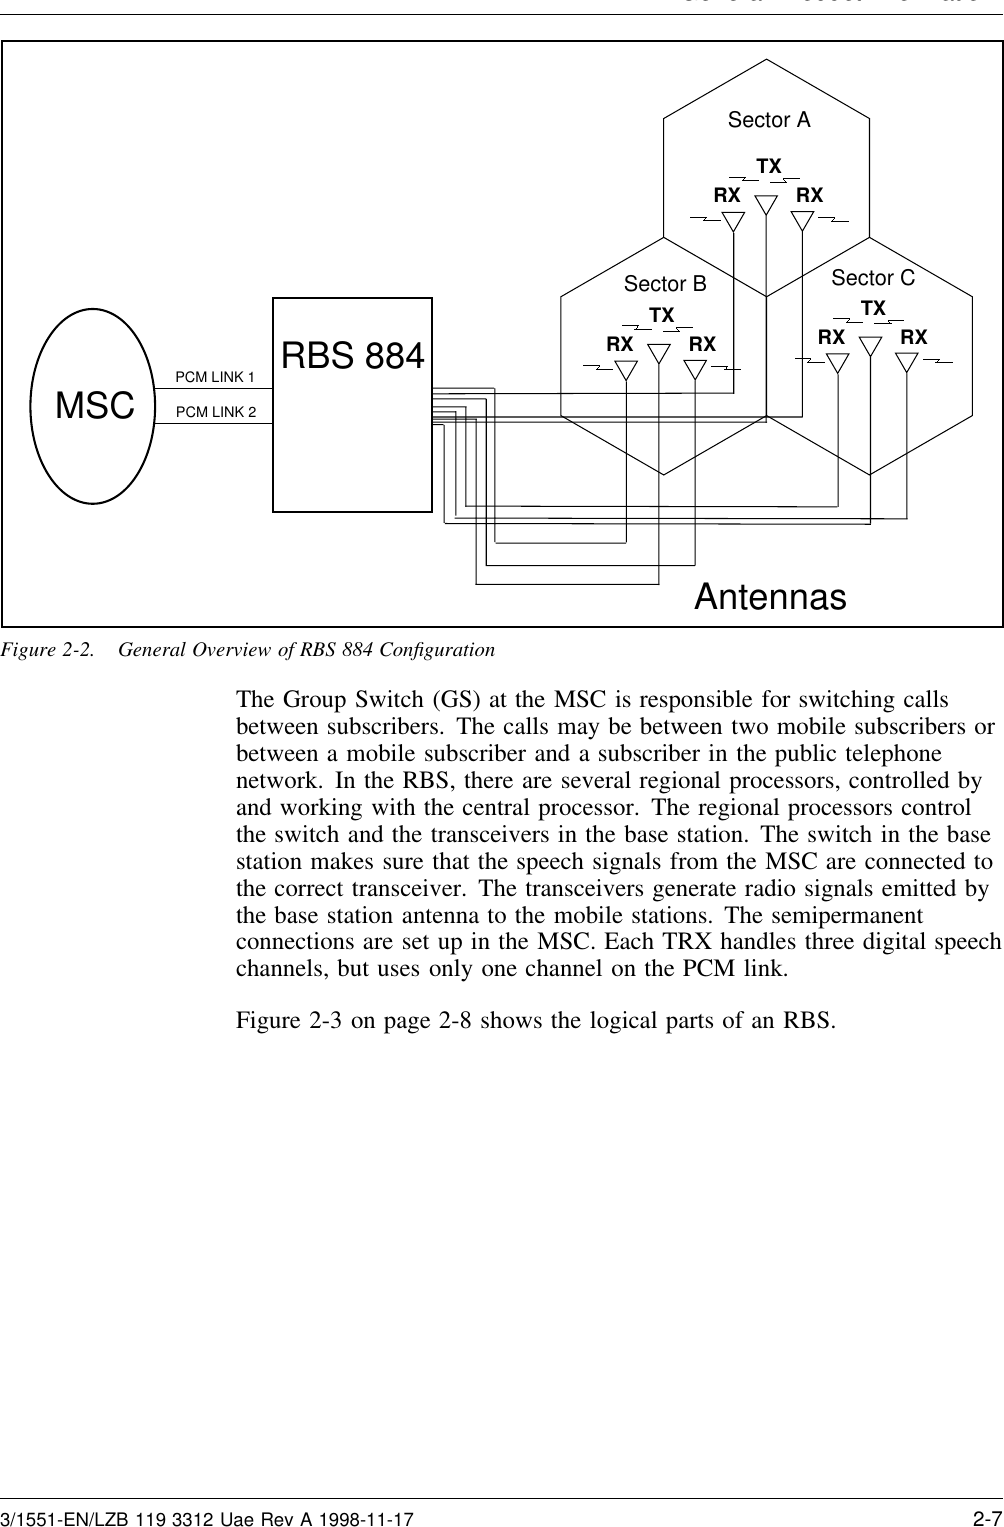 General Product InformationPCM LINK 1PCM LINK 2TXRX RXTXRX RXTXRX RXSector ASector B Sector CAntennasRBS 884MSCFigure 2-2. General Overview of RBS 884 ConﬁgurationThe Group Switch (GS) at the MSC is responsible for switching callsbetween subscribers. The calls may be between two mobile subscribers orbetween a mobile subscriber and a subscriber in the public telephonenetwork. In the RBS, there are several regional processors, controlled byand working with the central processor. The regional processors controlthe switch and the transceivers in the base station. The switch in the basestation makes sure that the speech signals from the MSC are connected tothe correct transceiver. The transceivers generate radio signals emitted bythe base station antenna to the mobile stations. The semipermanentconnections are set up in the MSC. Each TRX handles three digital speechchannels, but uses only one channel on the PCM link.Figure 2-3 on page 2-8 shows the logical parts of an RBS.3/1551-EN/LZB 119 3312 Uae Rev A 1998-11-17 2-7